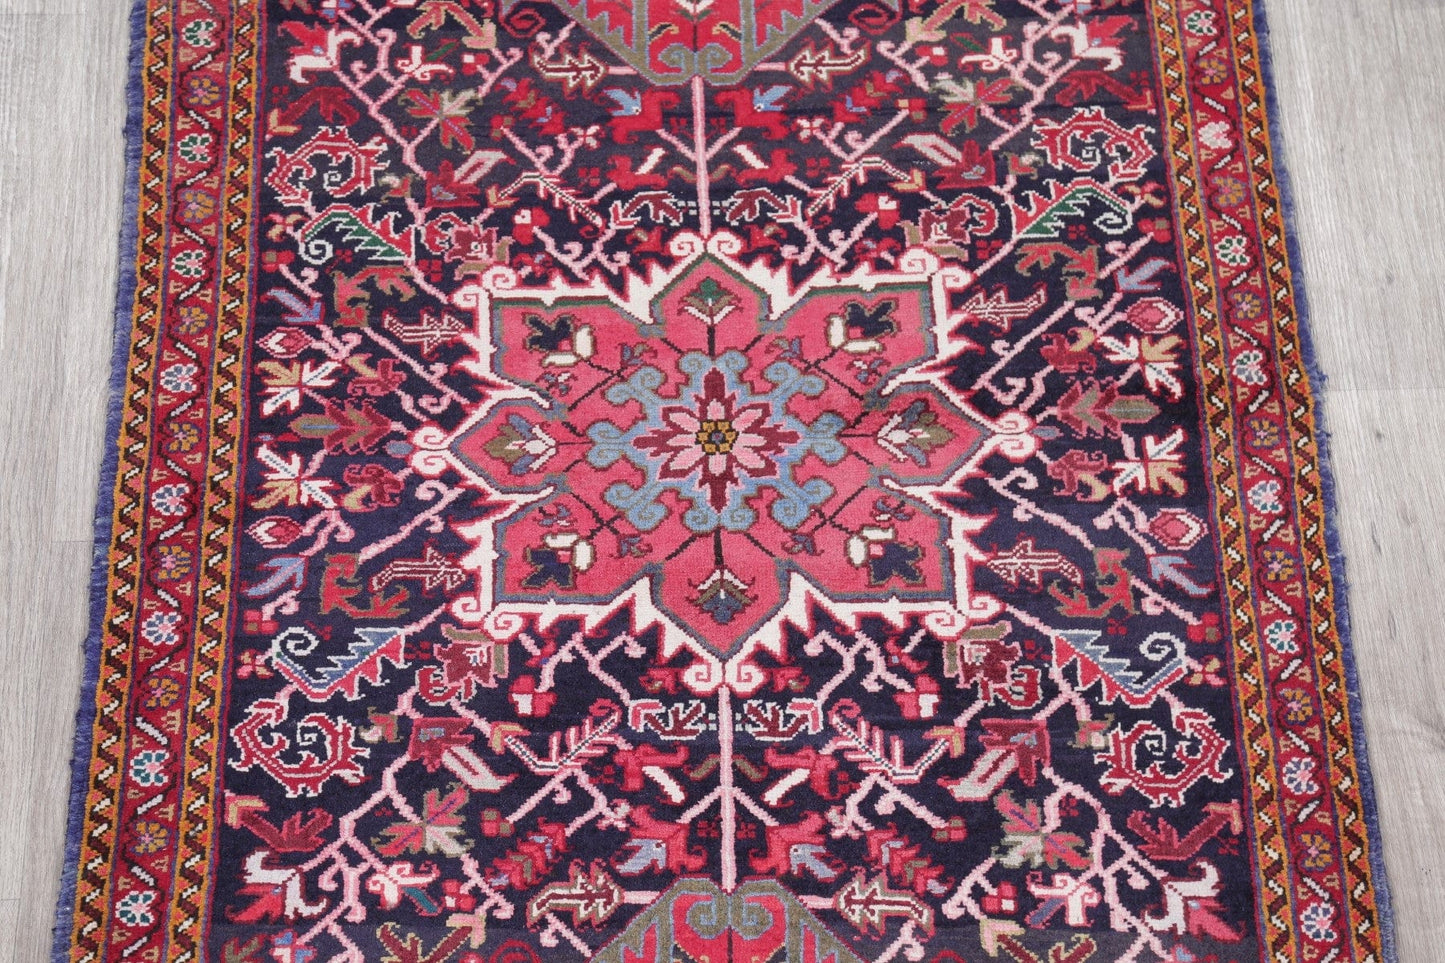 One of a Kind Geometric Heriz Persian Hand-Knotted 4x12 Wool Runner Rug